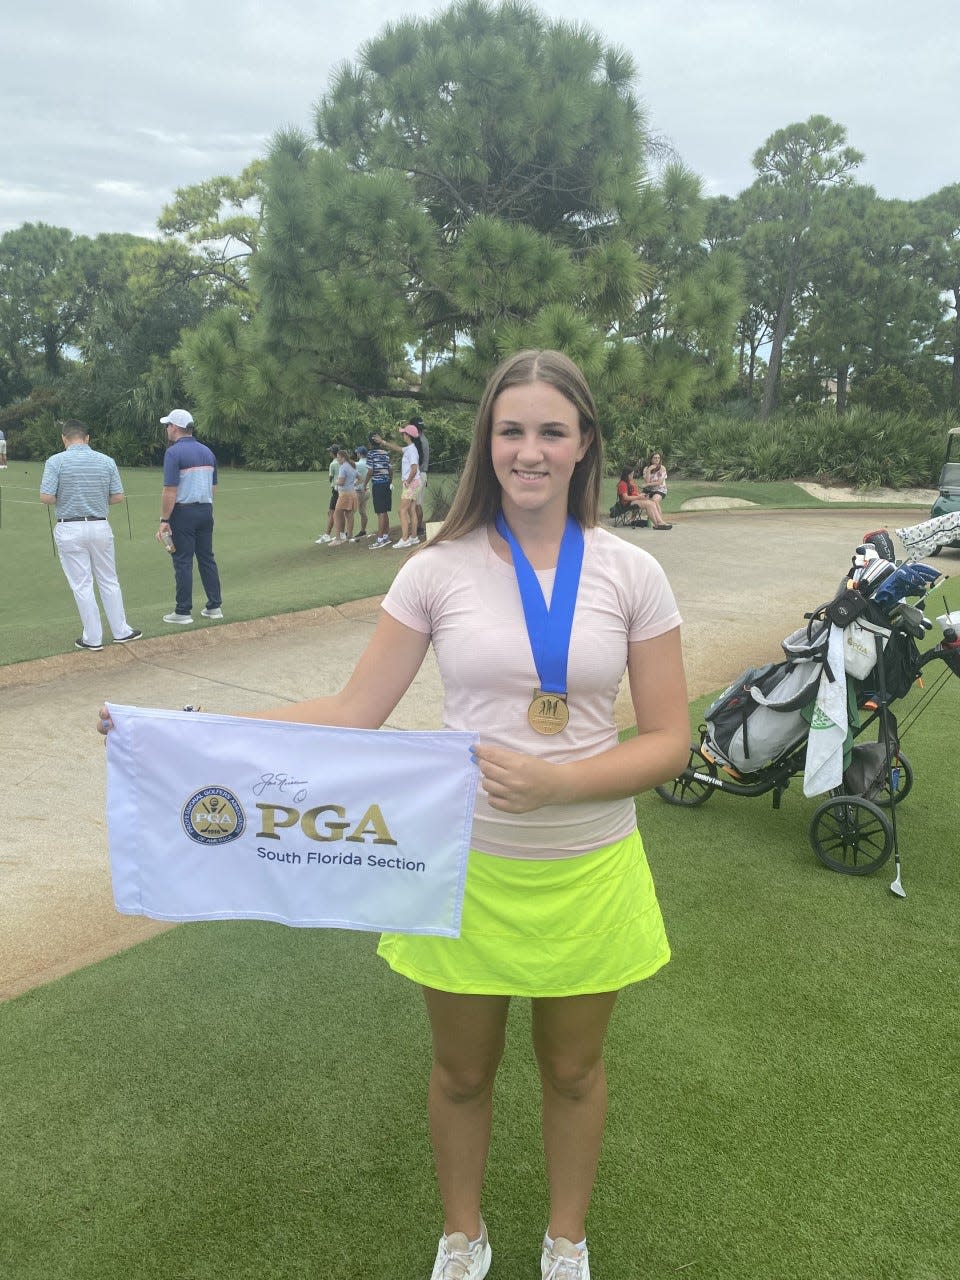 Jupiter's Leah Gram advanced to the Drive Chip & Putt competition next spring in Augusta, Georgia in the Girls 12-13 with 129 points.